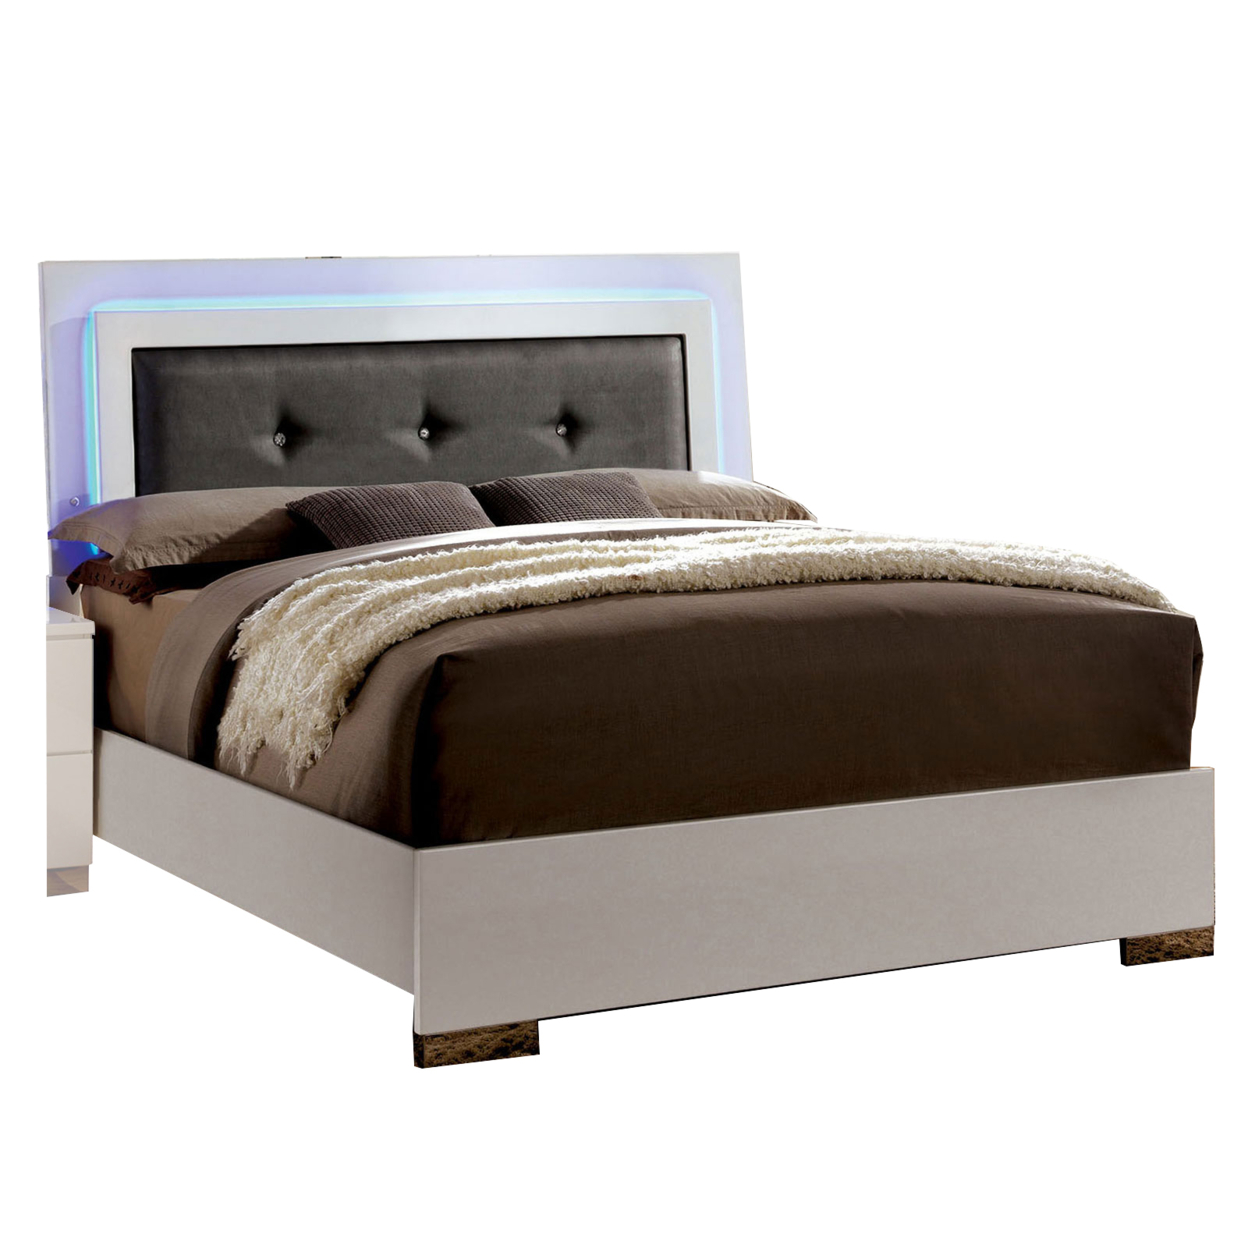 Contemporary Full Bed With LED Trim And Lacquer Coating, White And Gray- Saltoro Sherpi